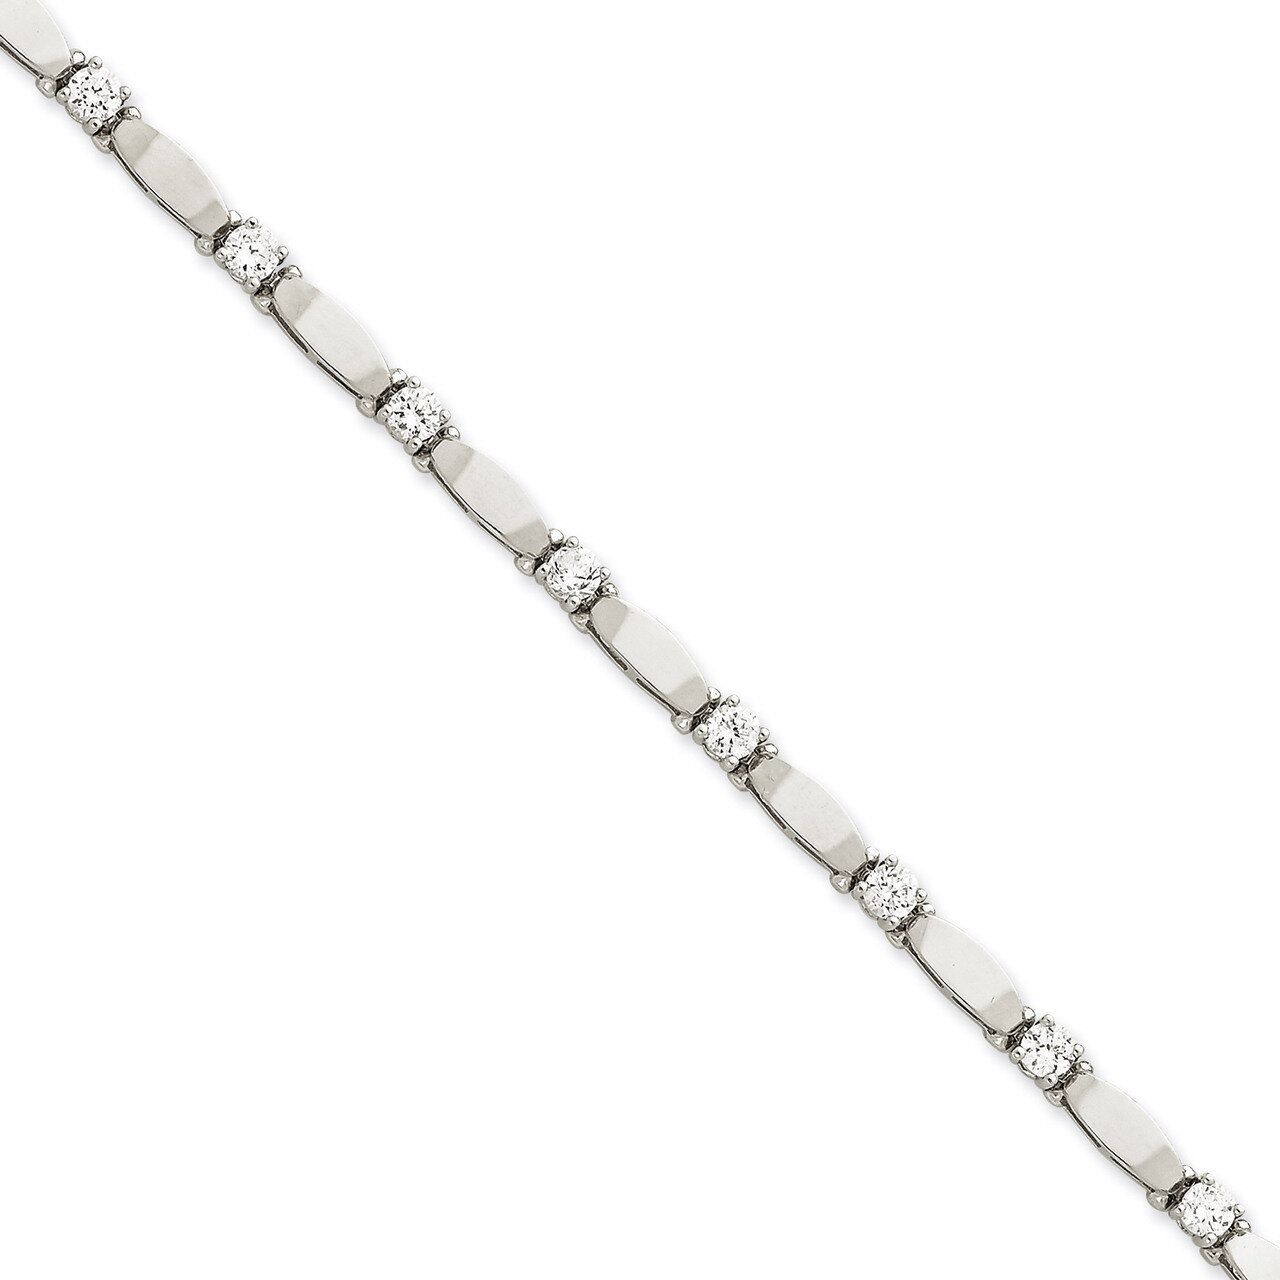 7in Holds 11 4mm Stones 2.75ct Bar Link Tennis Bracelet Mounting 14k White Gold X2363W